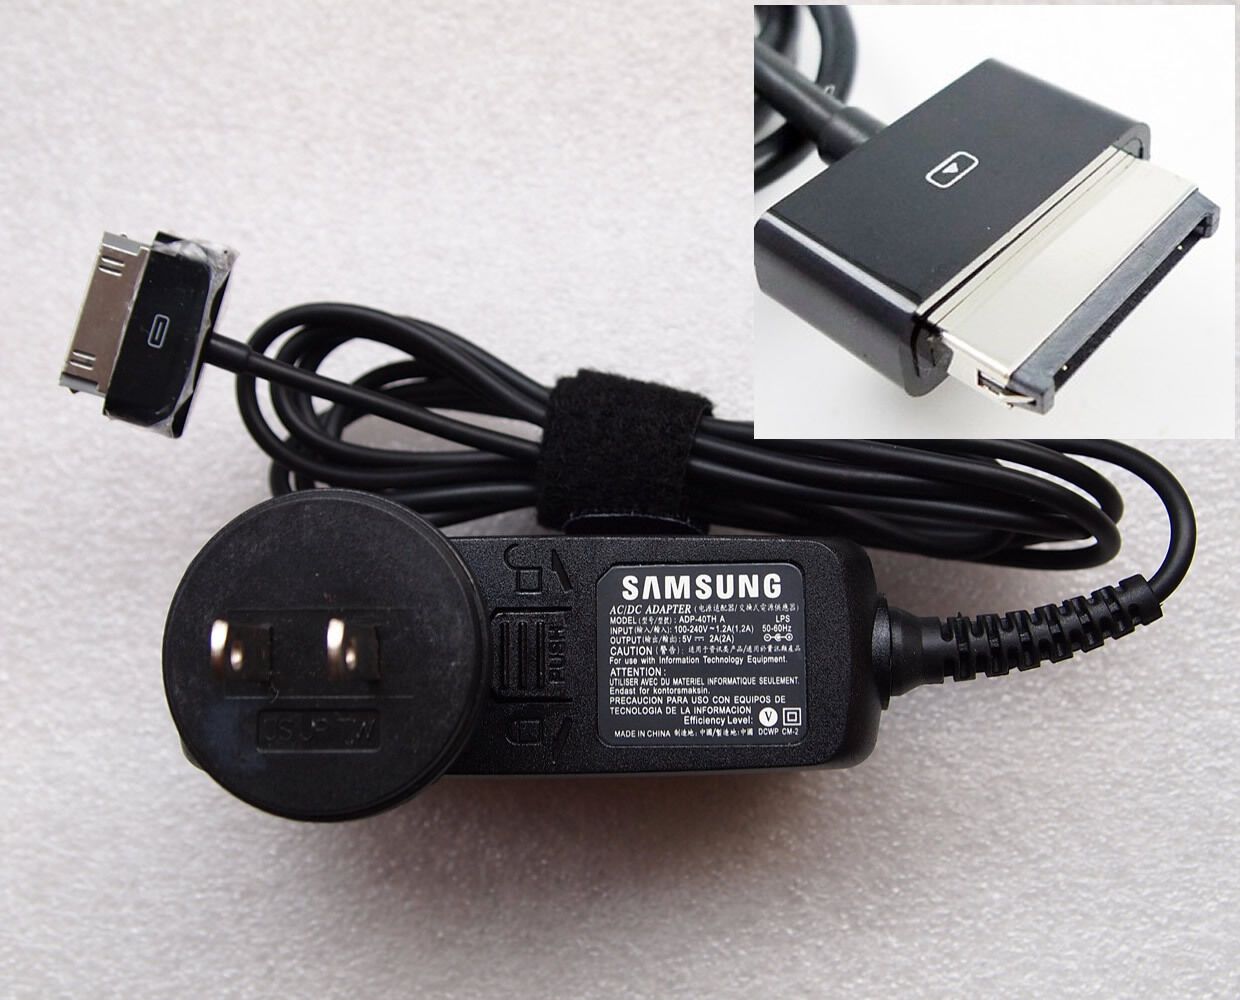 5V 2A AC Adapter Charger + Cable for Samsung Galaxy Tab GT-P1000 GT-P1010